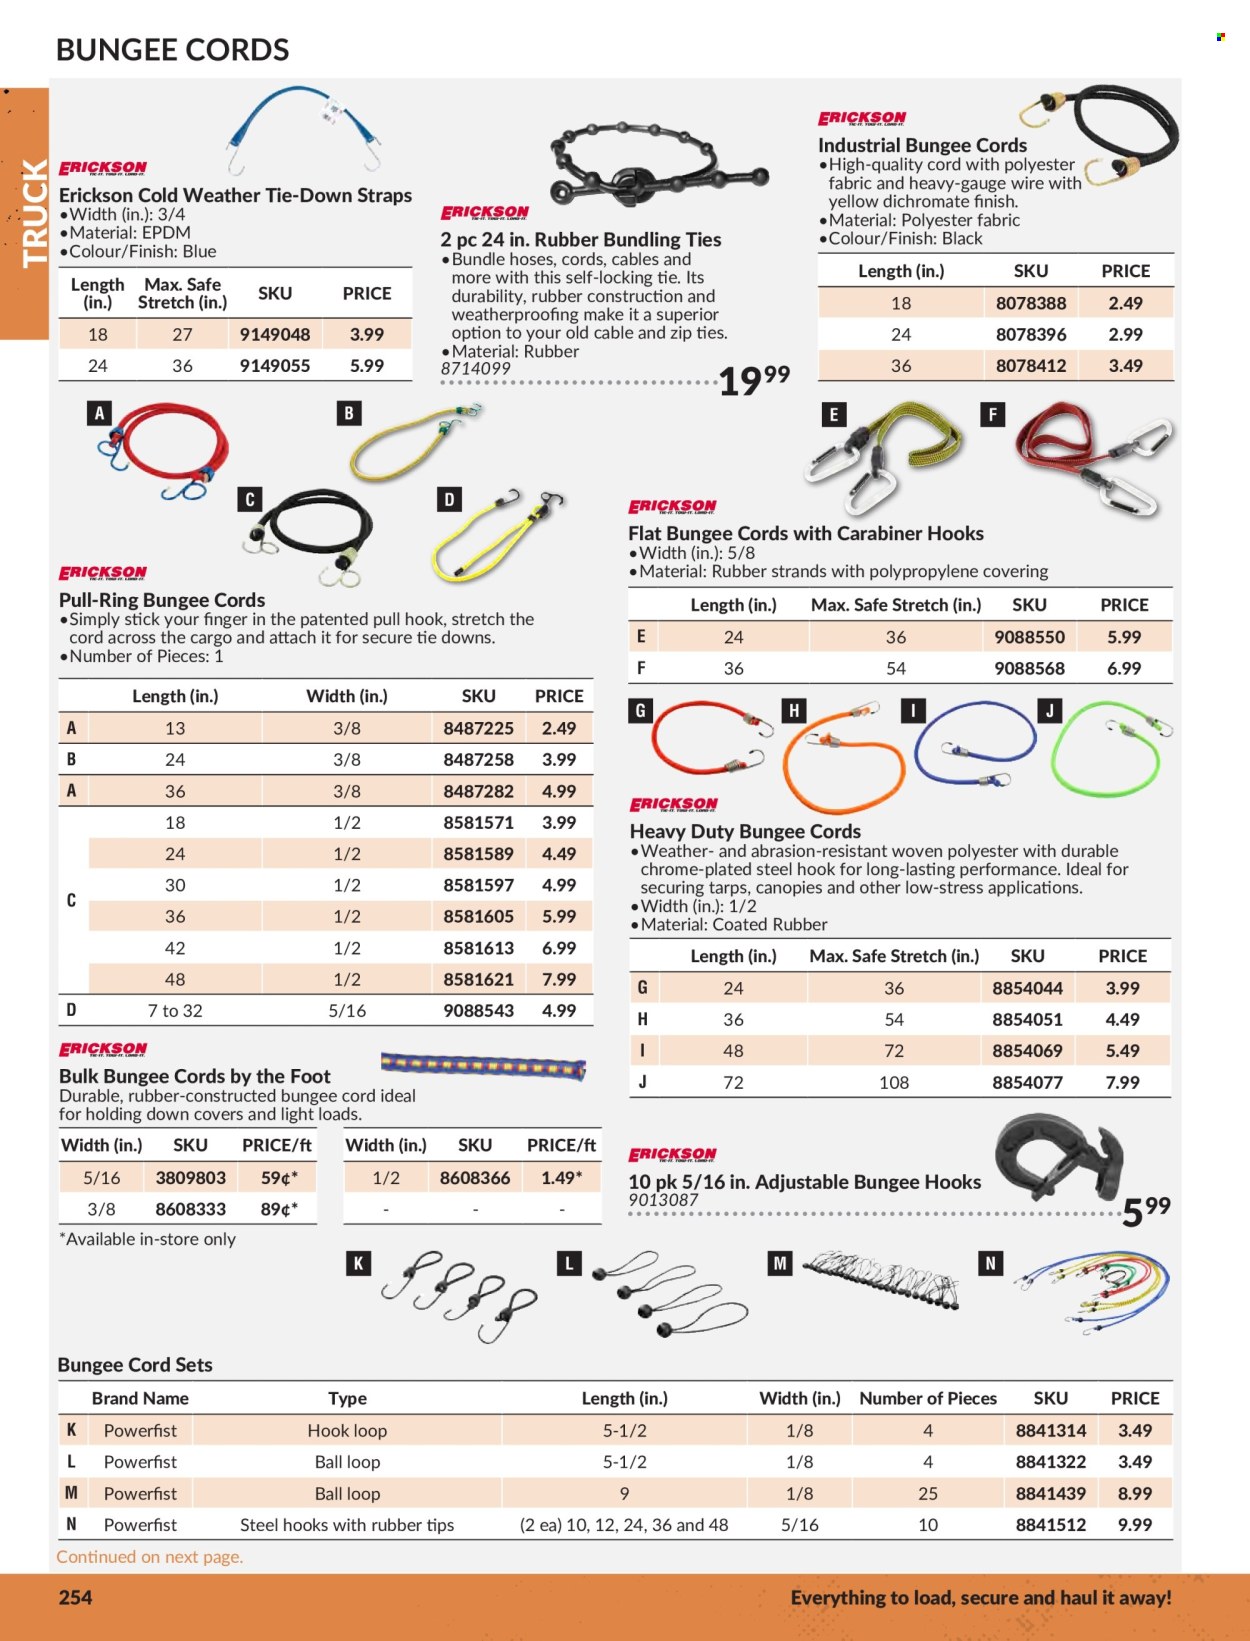 thumbnail - Princess Auto Flyer - Sales products - bungee cords, gauge, tie downs. Page 258.